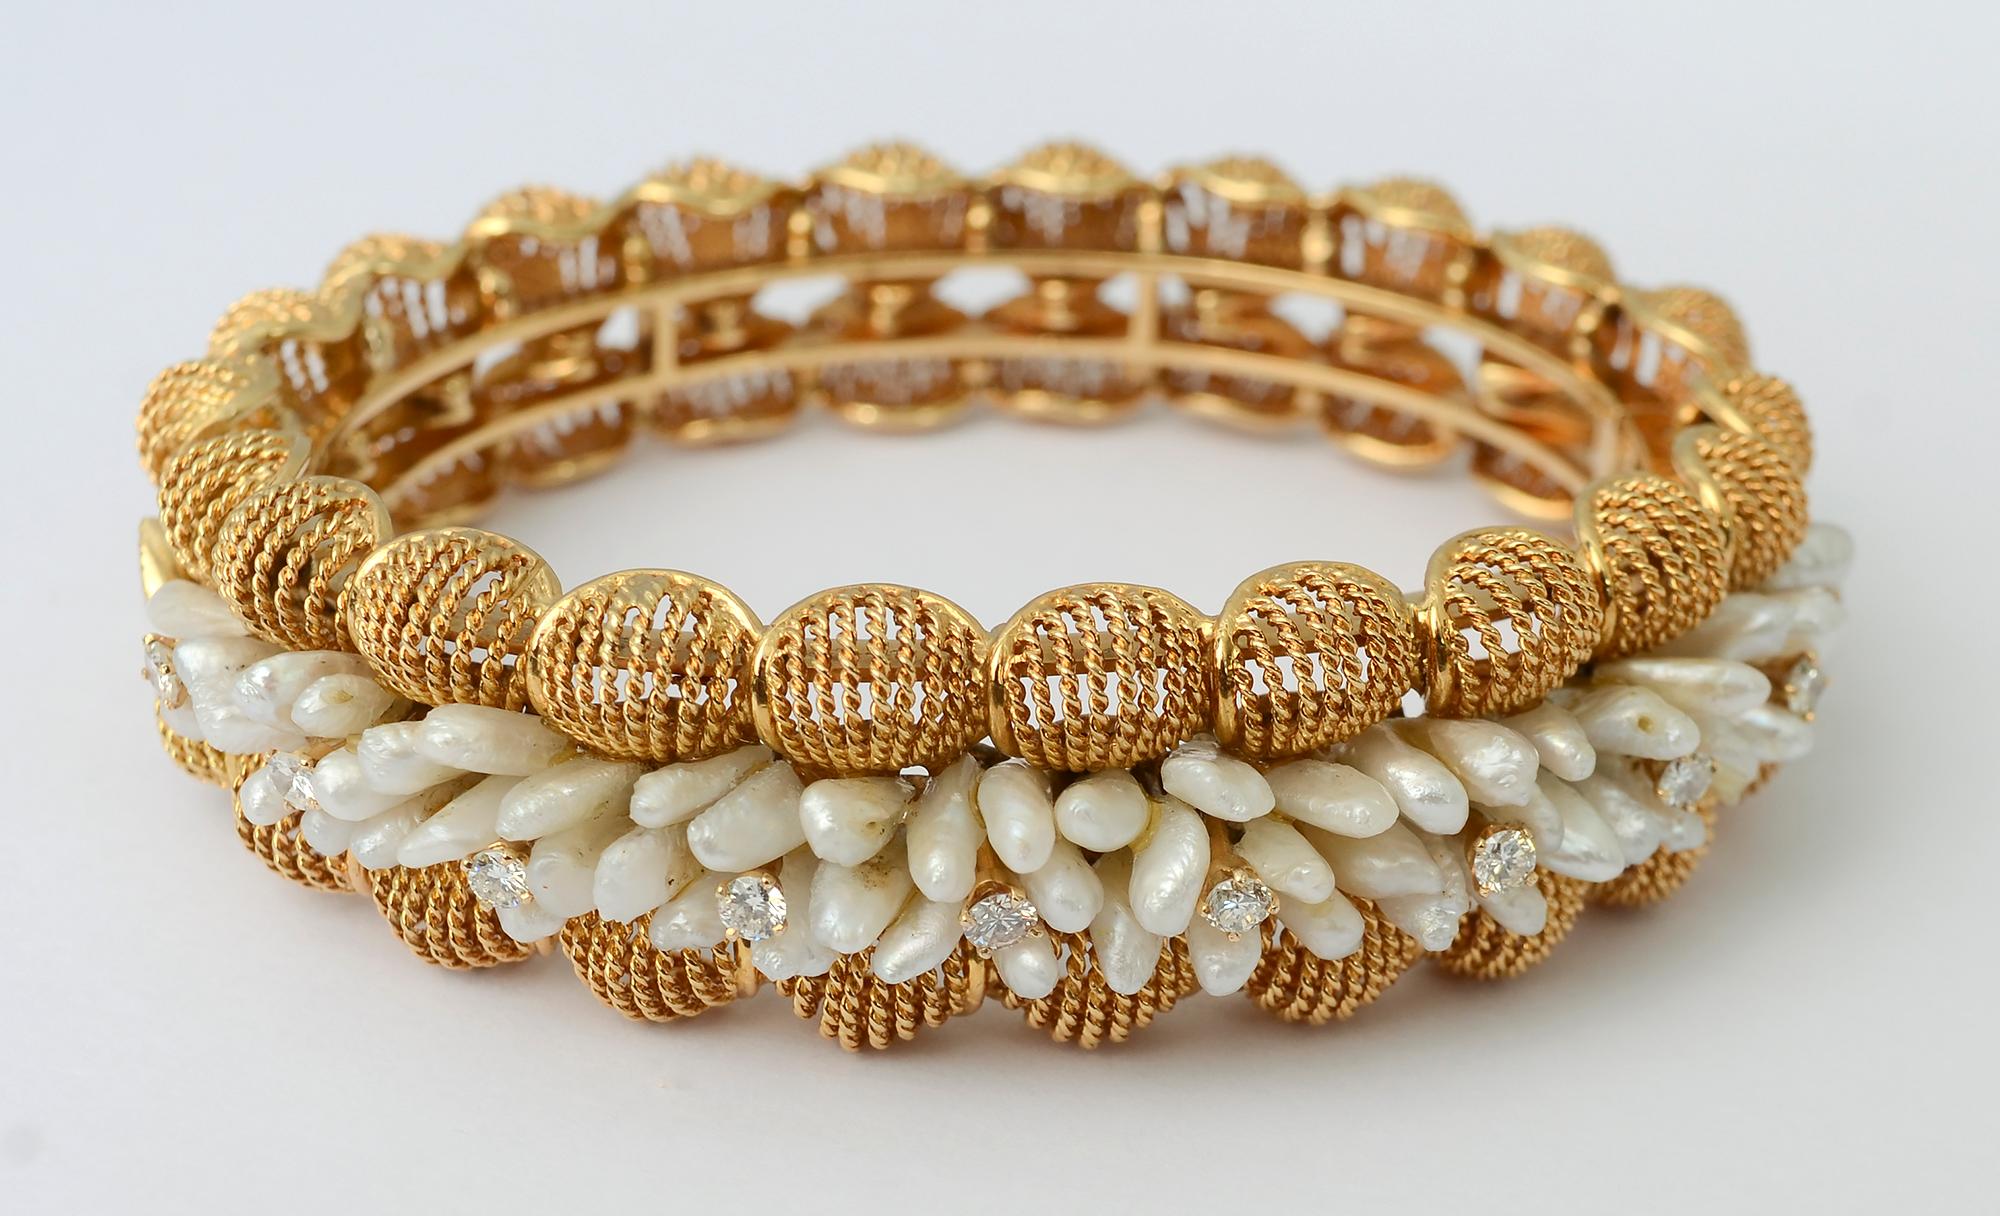 This elegant hinged bangle bracelet is adorned with clusters of seed pearls highlighted with ten diamonds.
The stones are nestled between two rows of round, three dimensional gold links that are fixed in place. Each of the circles is filled with